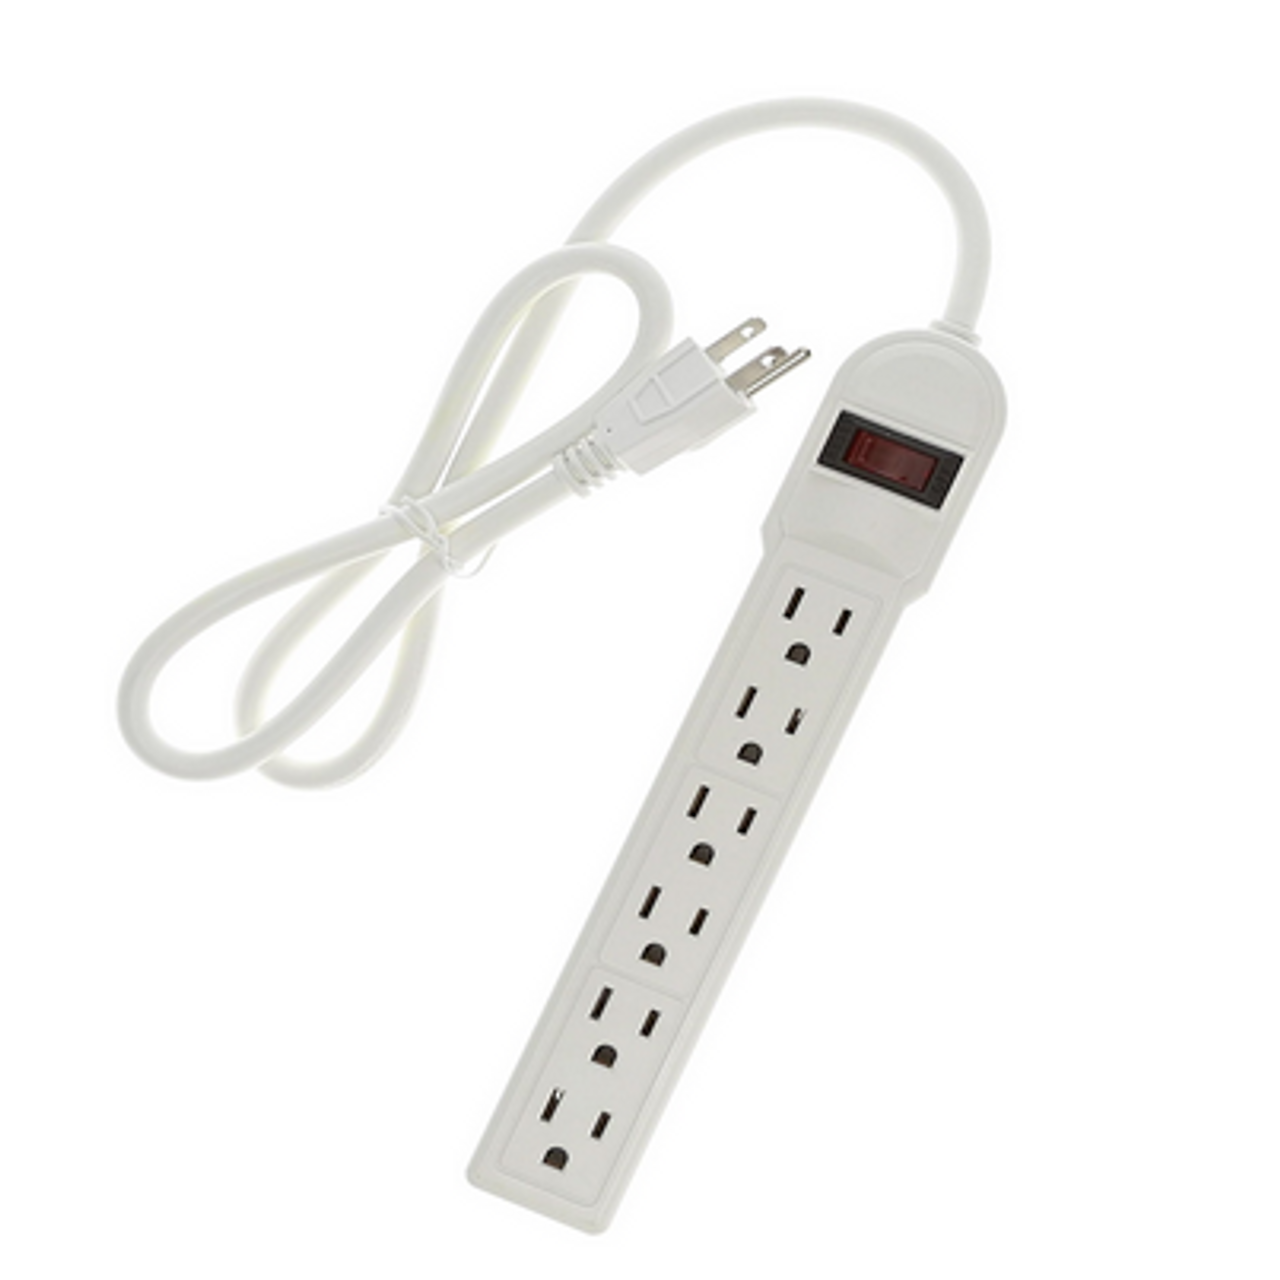 6 Outlet Surge Protector Power Strip with 3 ft. Cord